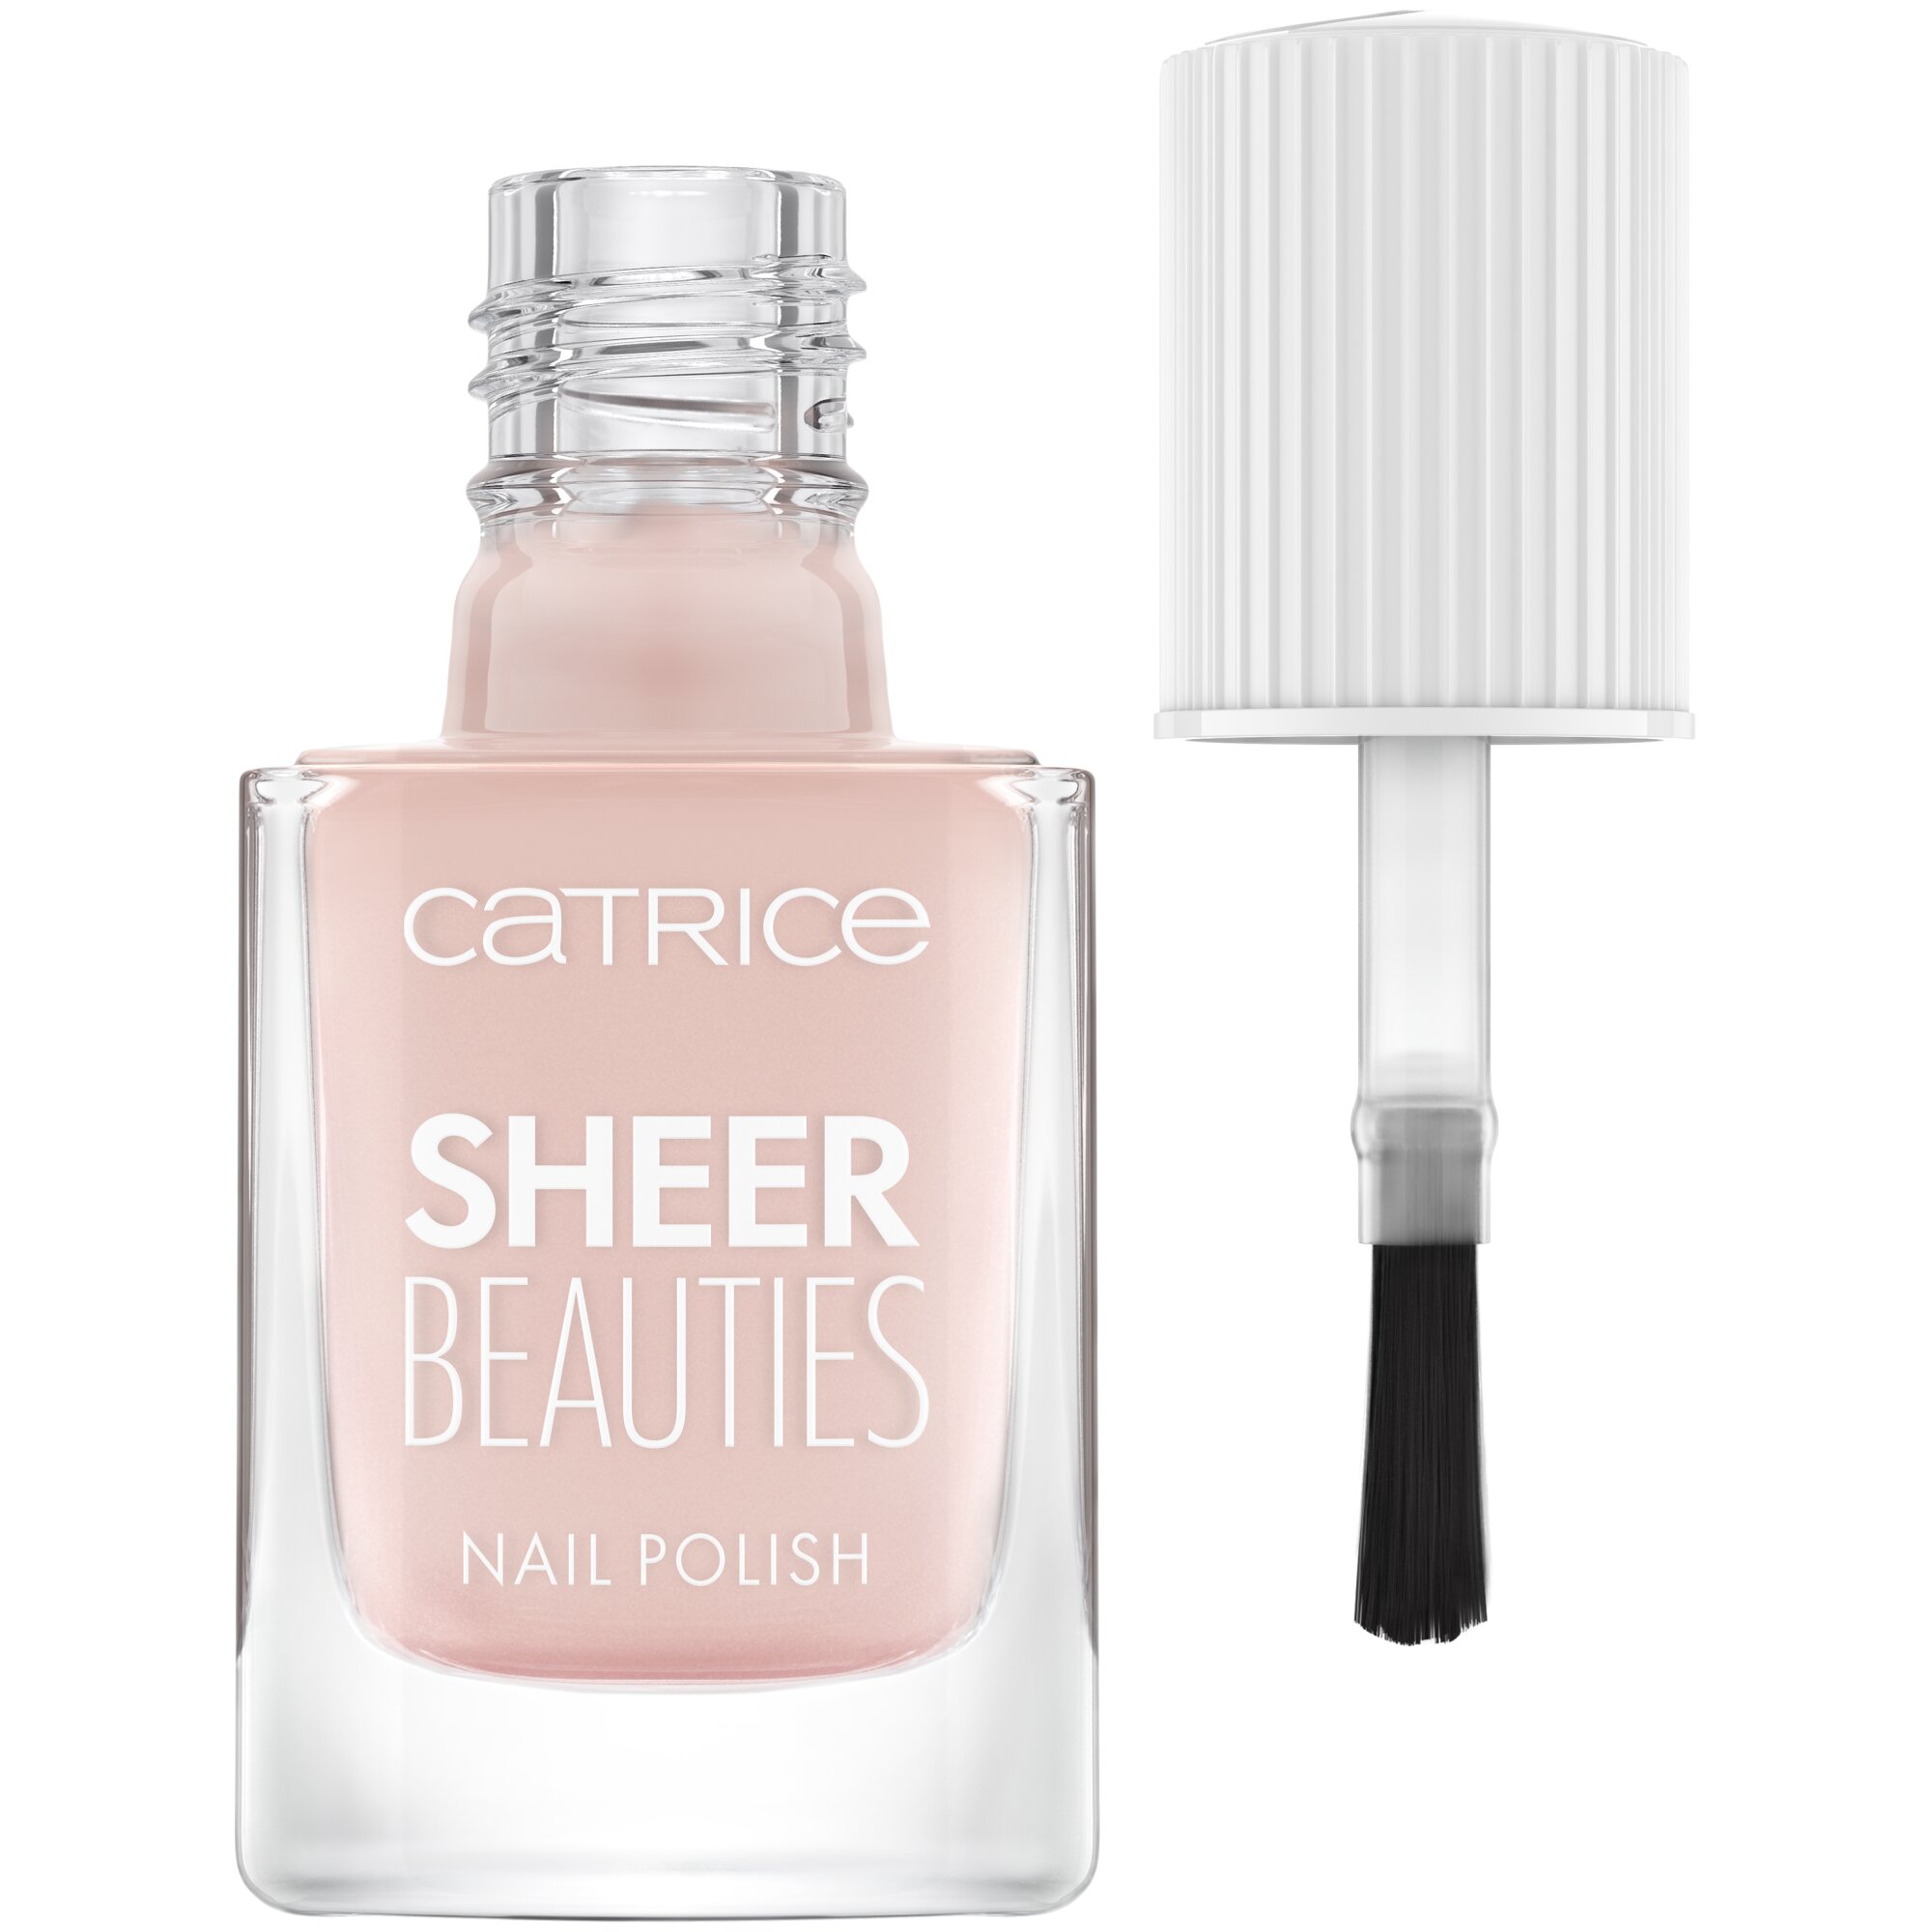 Lac pentru unghii Sheer Beauties, 020 - Roses Are Rosy, 10.5 ml, Catrice